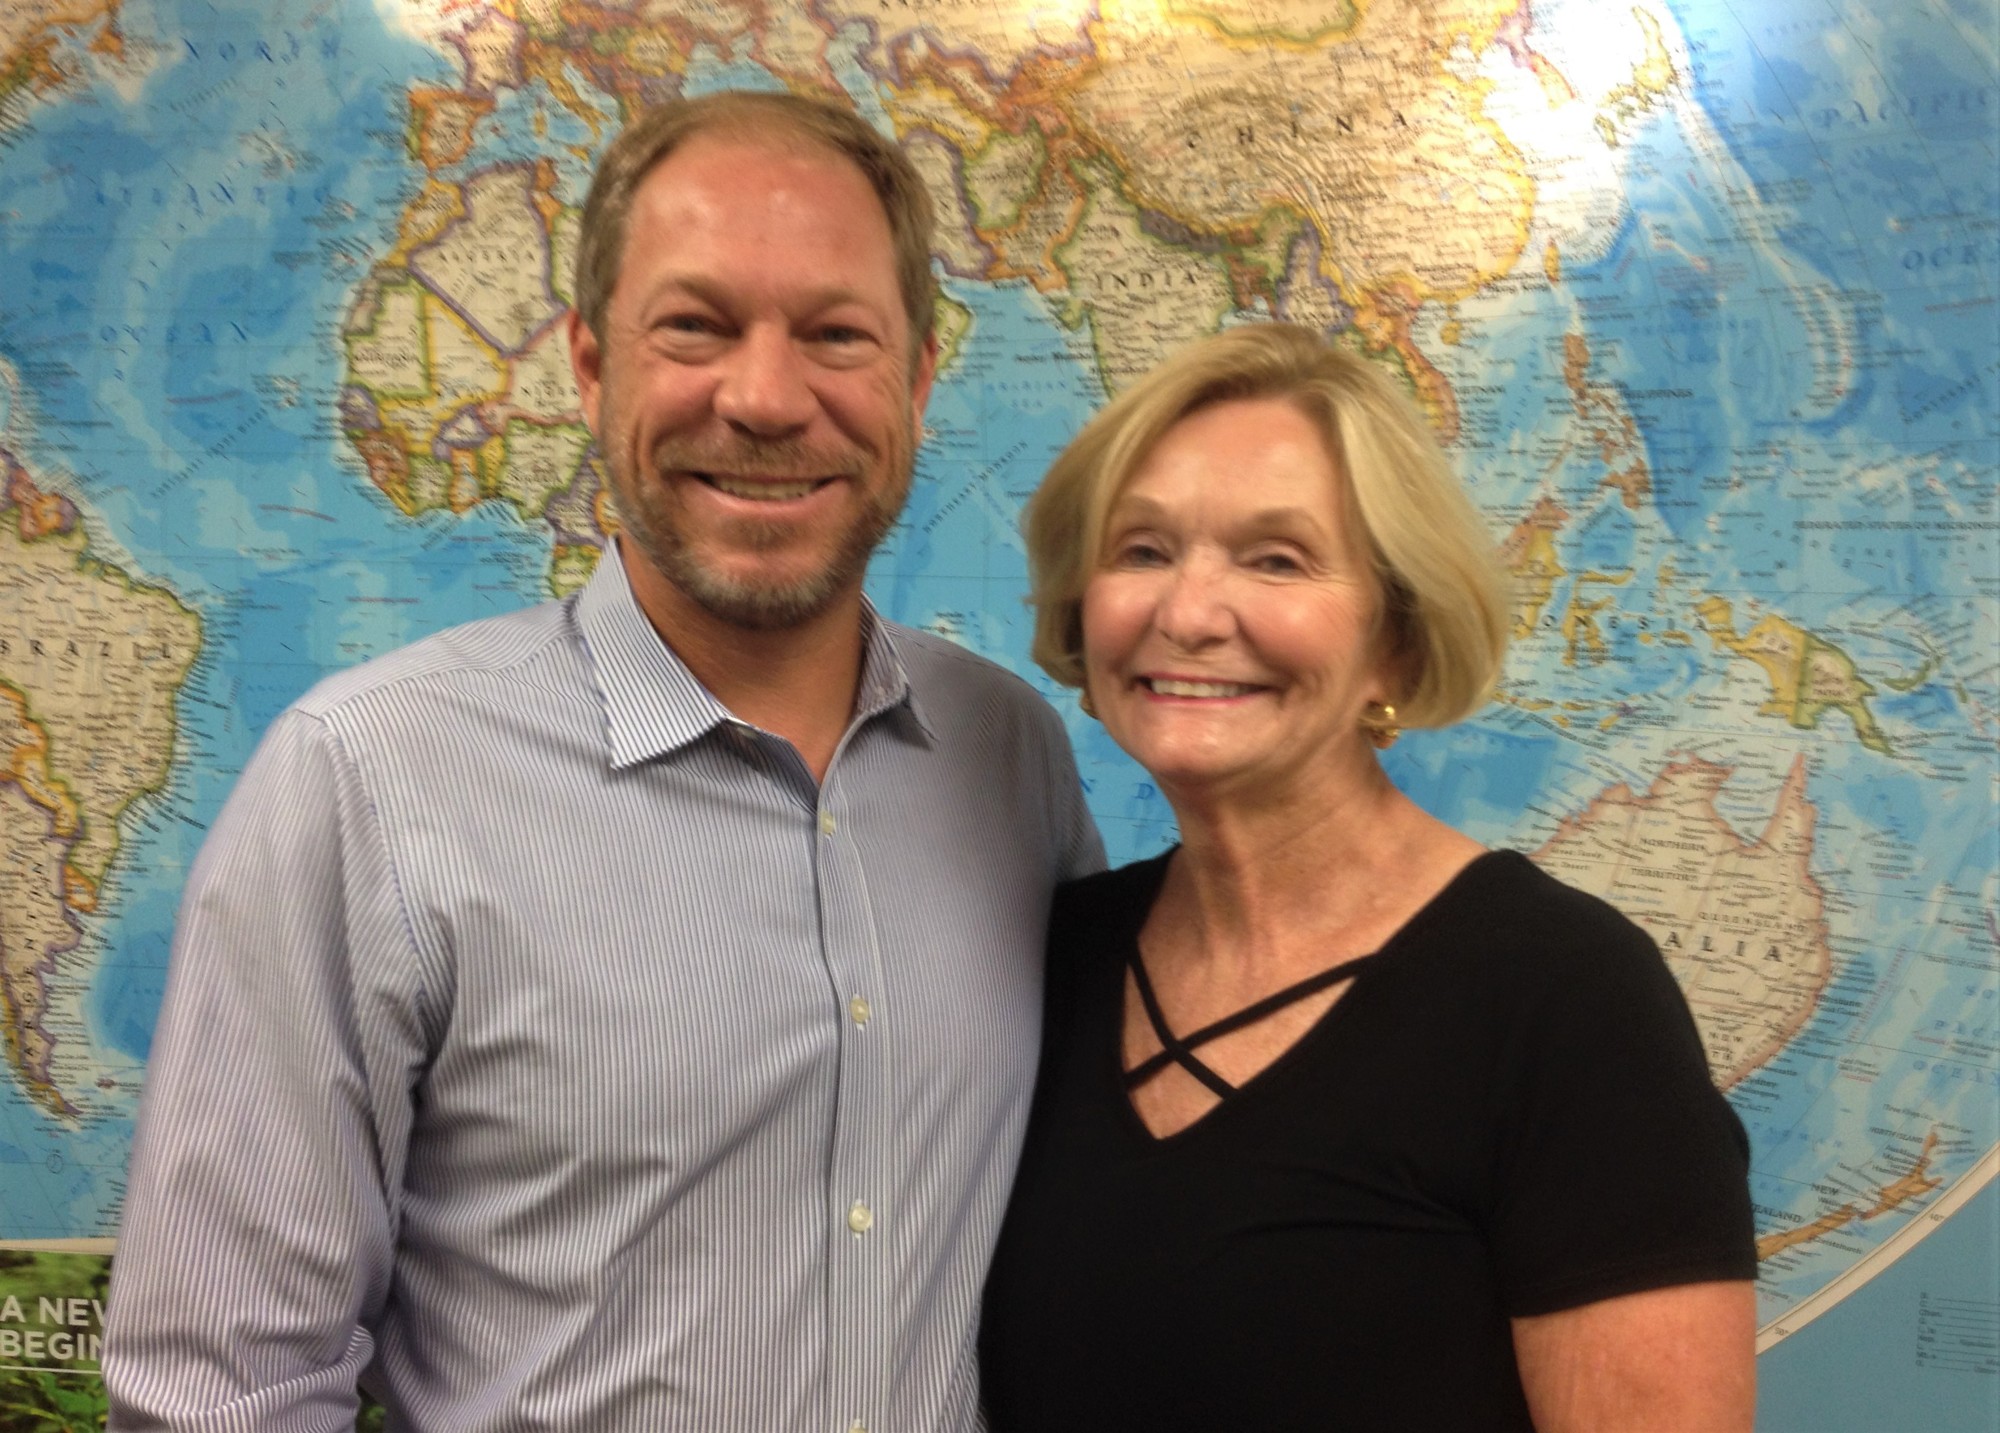 John Upchurch and his mother, Karen, have seen growth for their business, Odyssey Travel. Photo by Wayne Grant